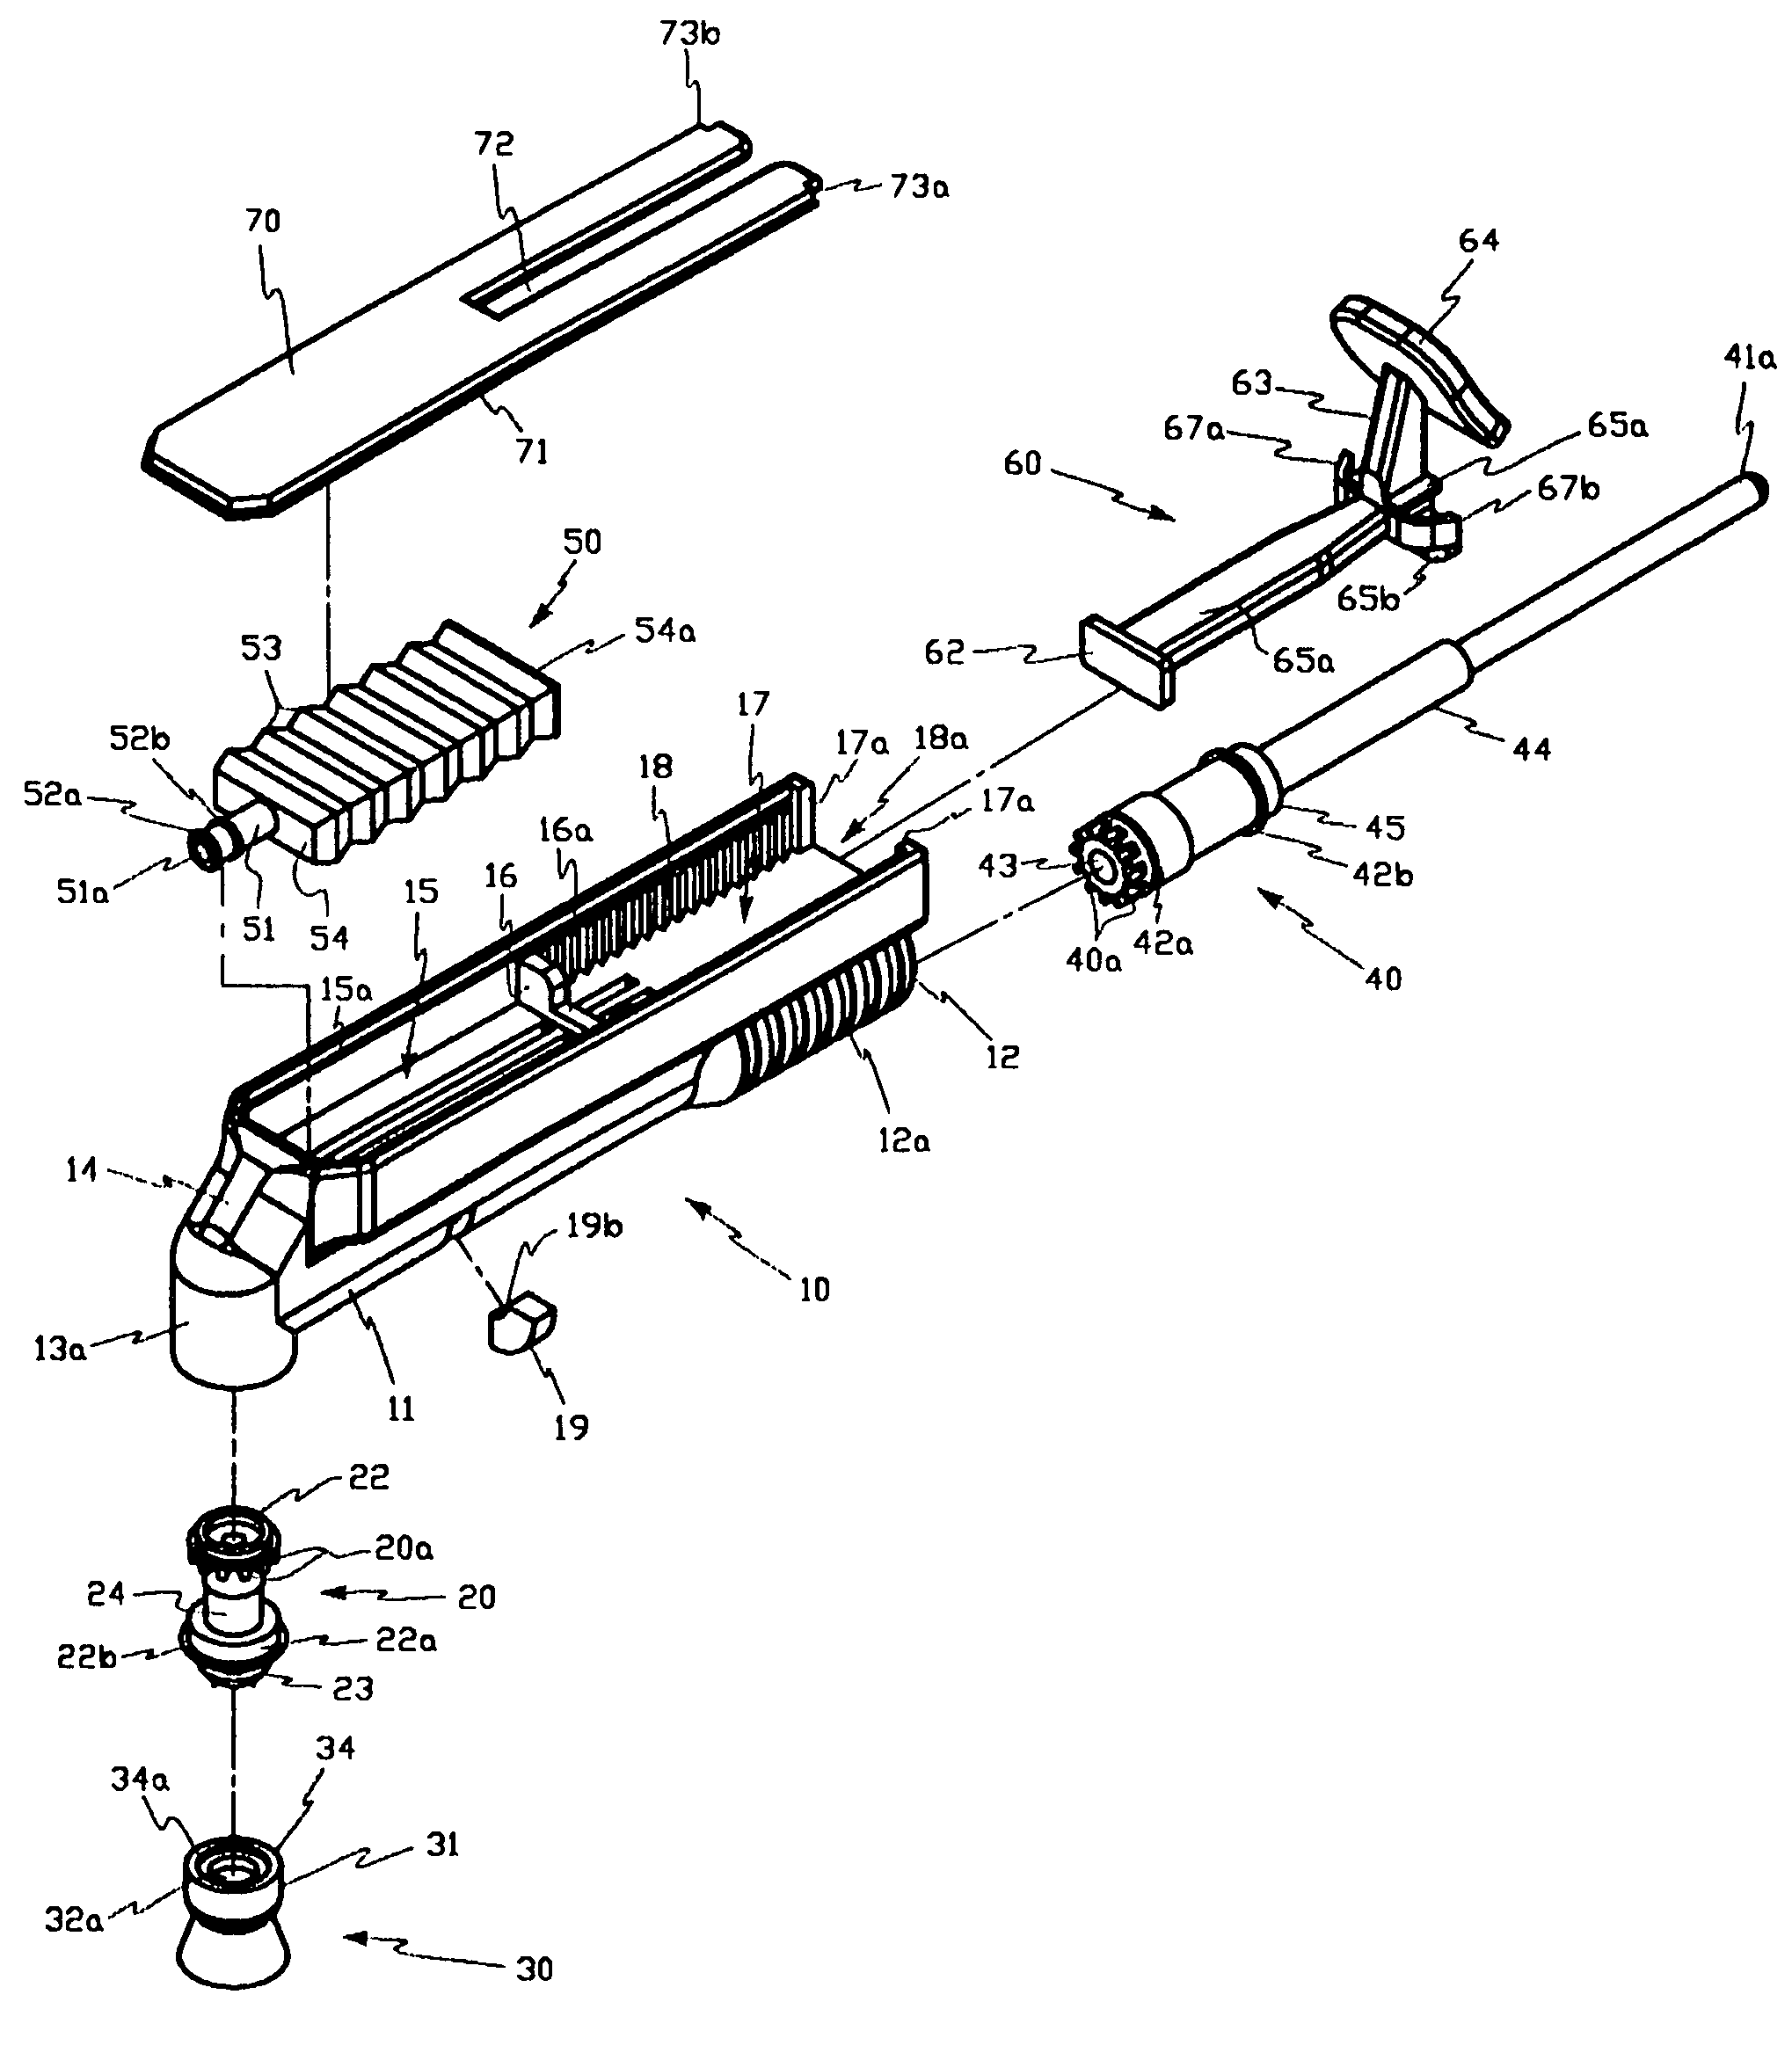 Disposable dental prophylaxis apparatus capable of discharging predetermined amount of dentifrice material therefrom